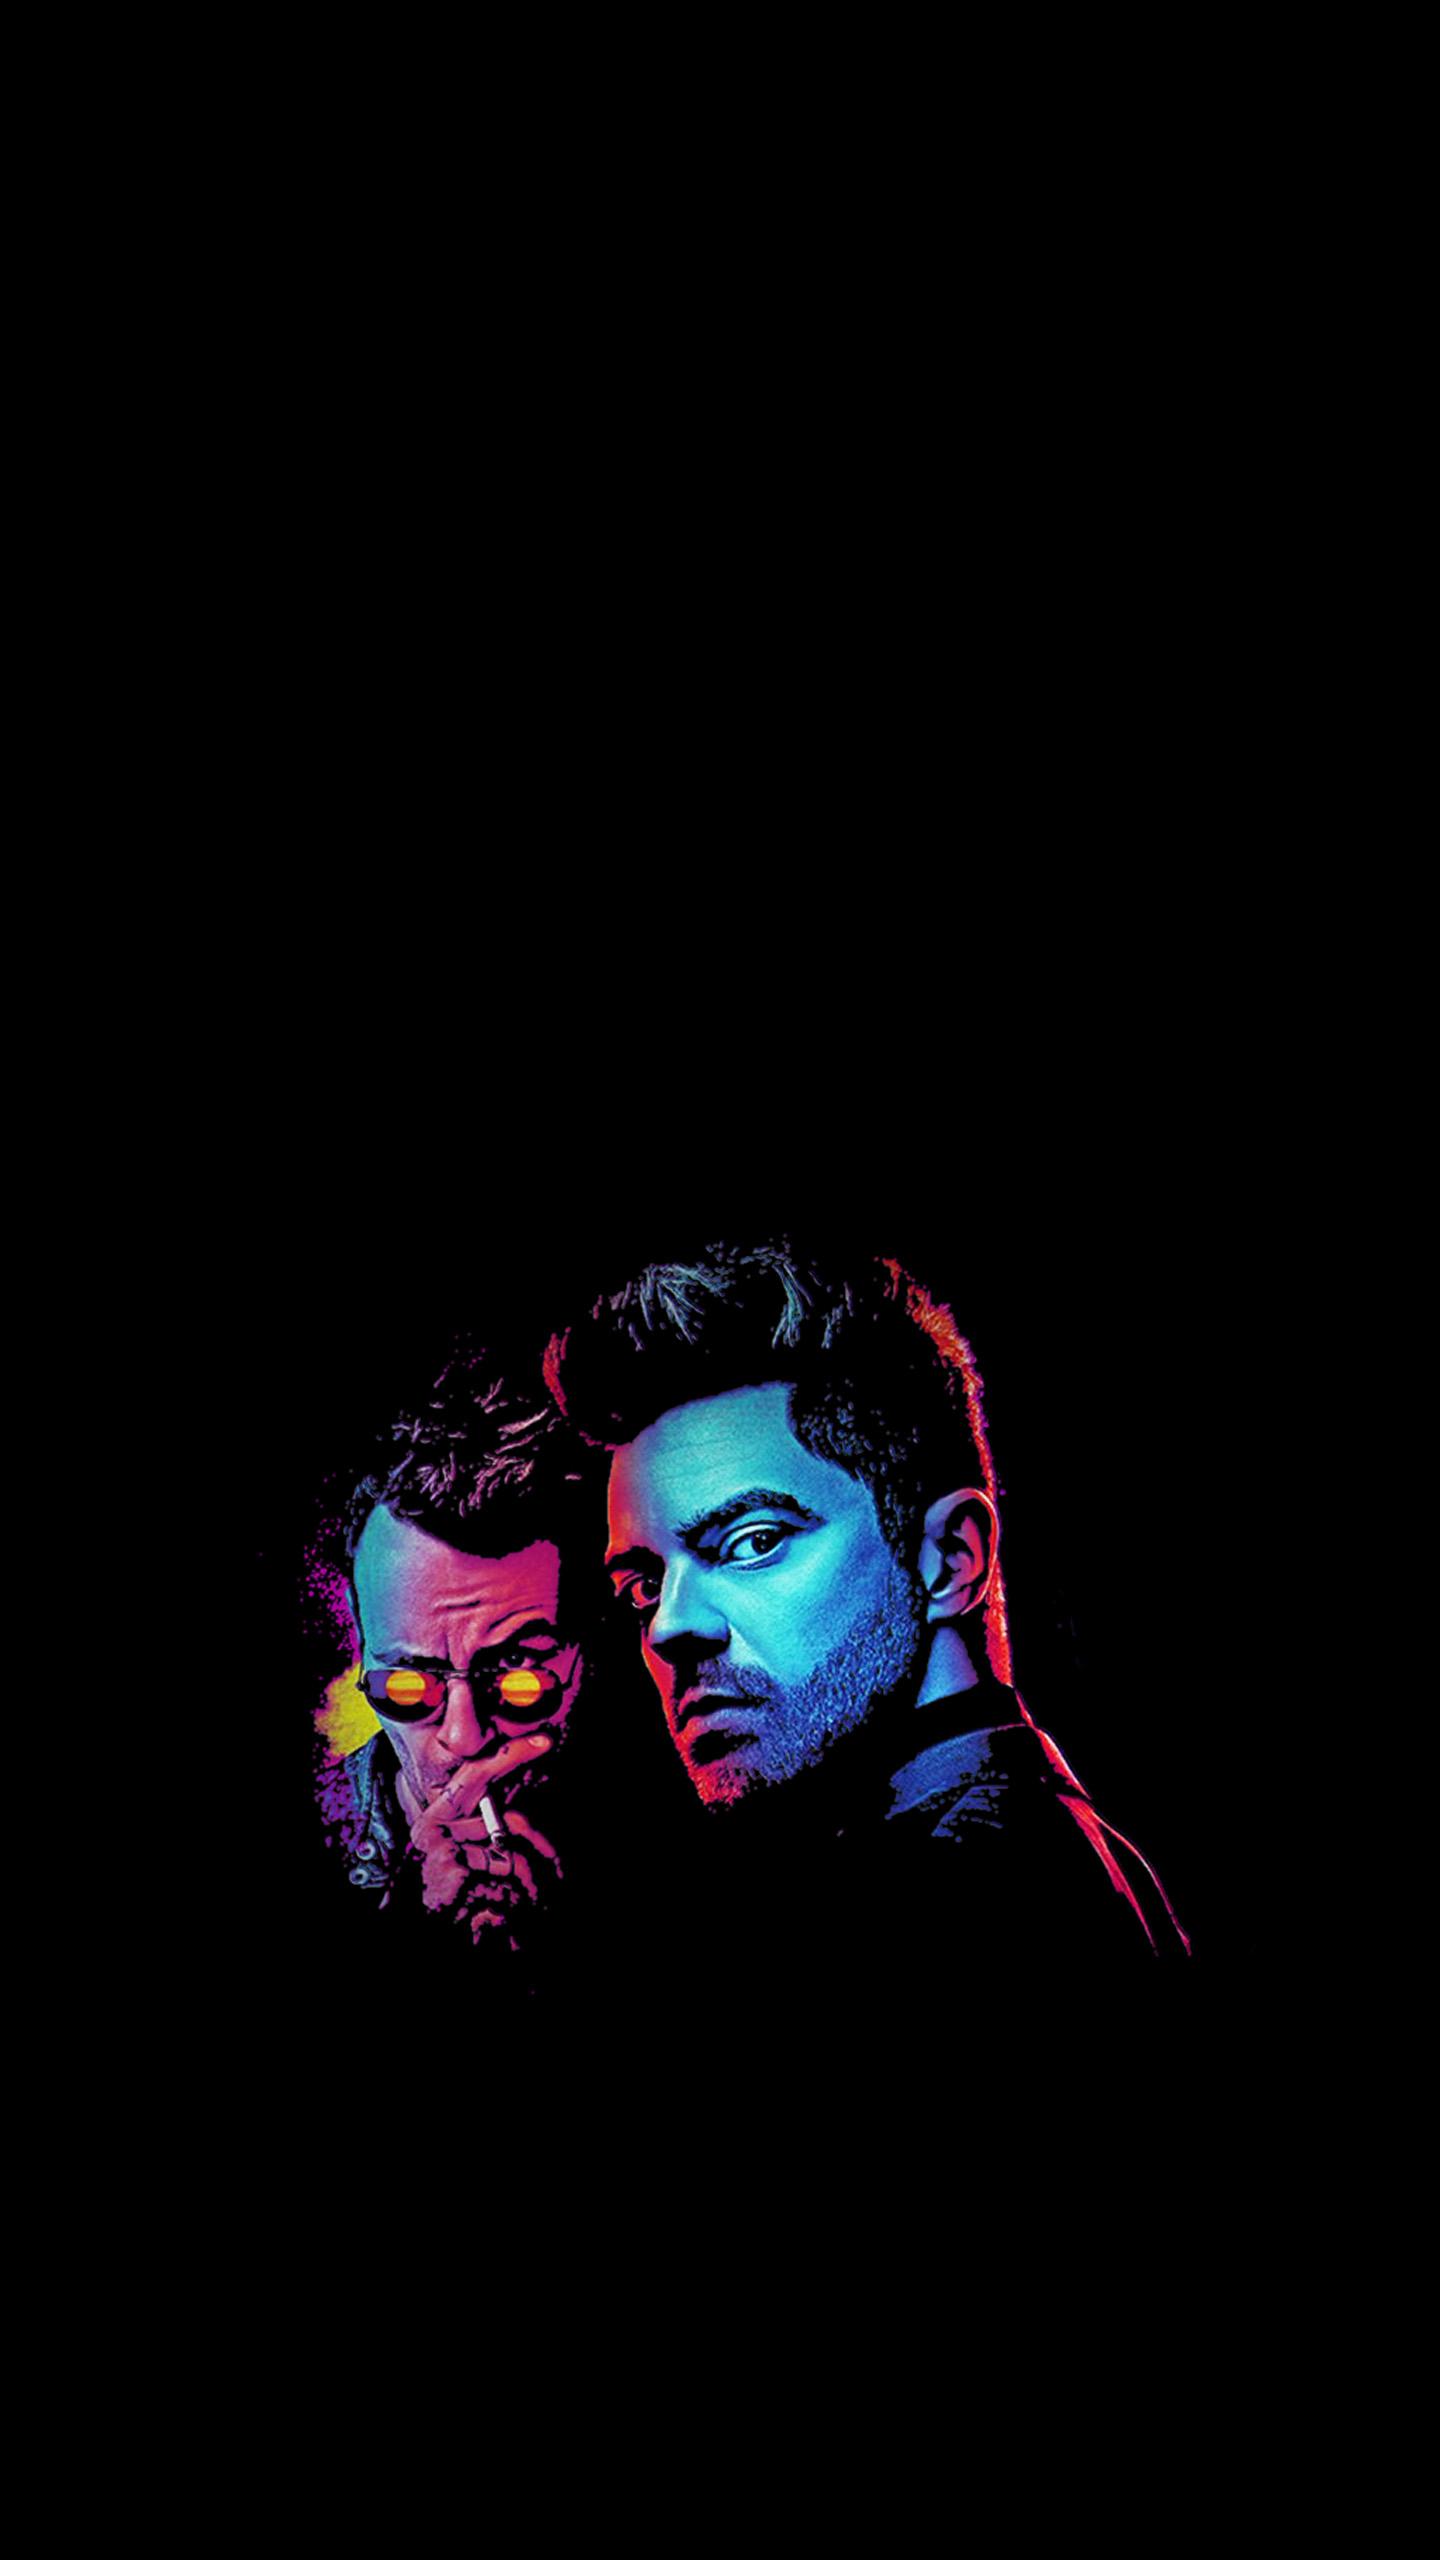 Made This Preacher Wallpaper Thought Some Of You Might Like It